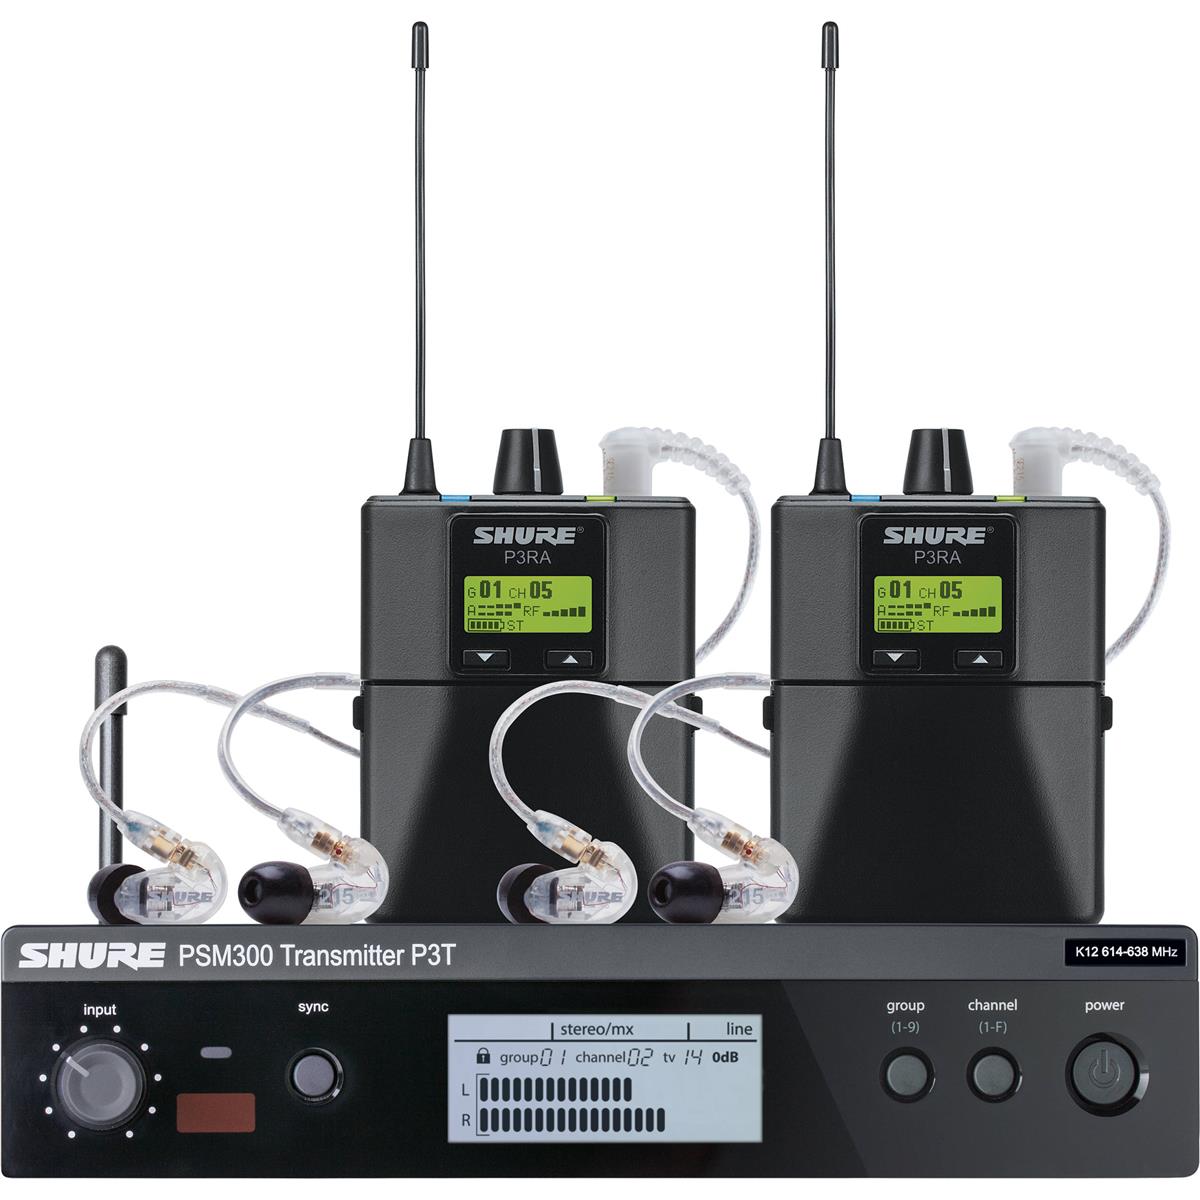 Shure PSM 300 Twin Pack Pro Wireless In-Ear Monitor Kit, G20: 488-512MHz, Black -  P3TRA215TWP-G20